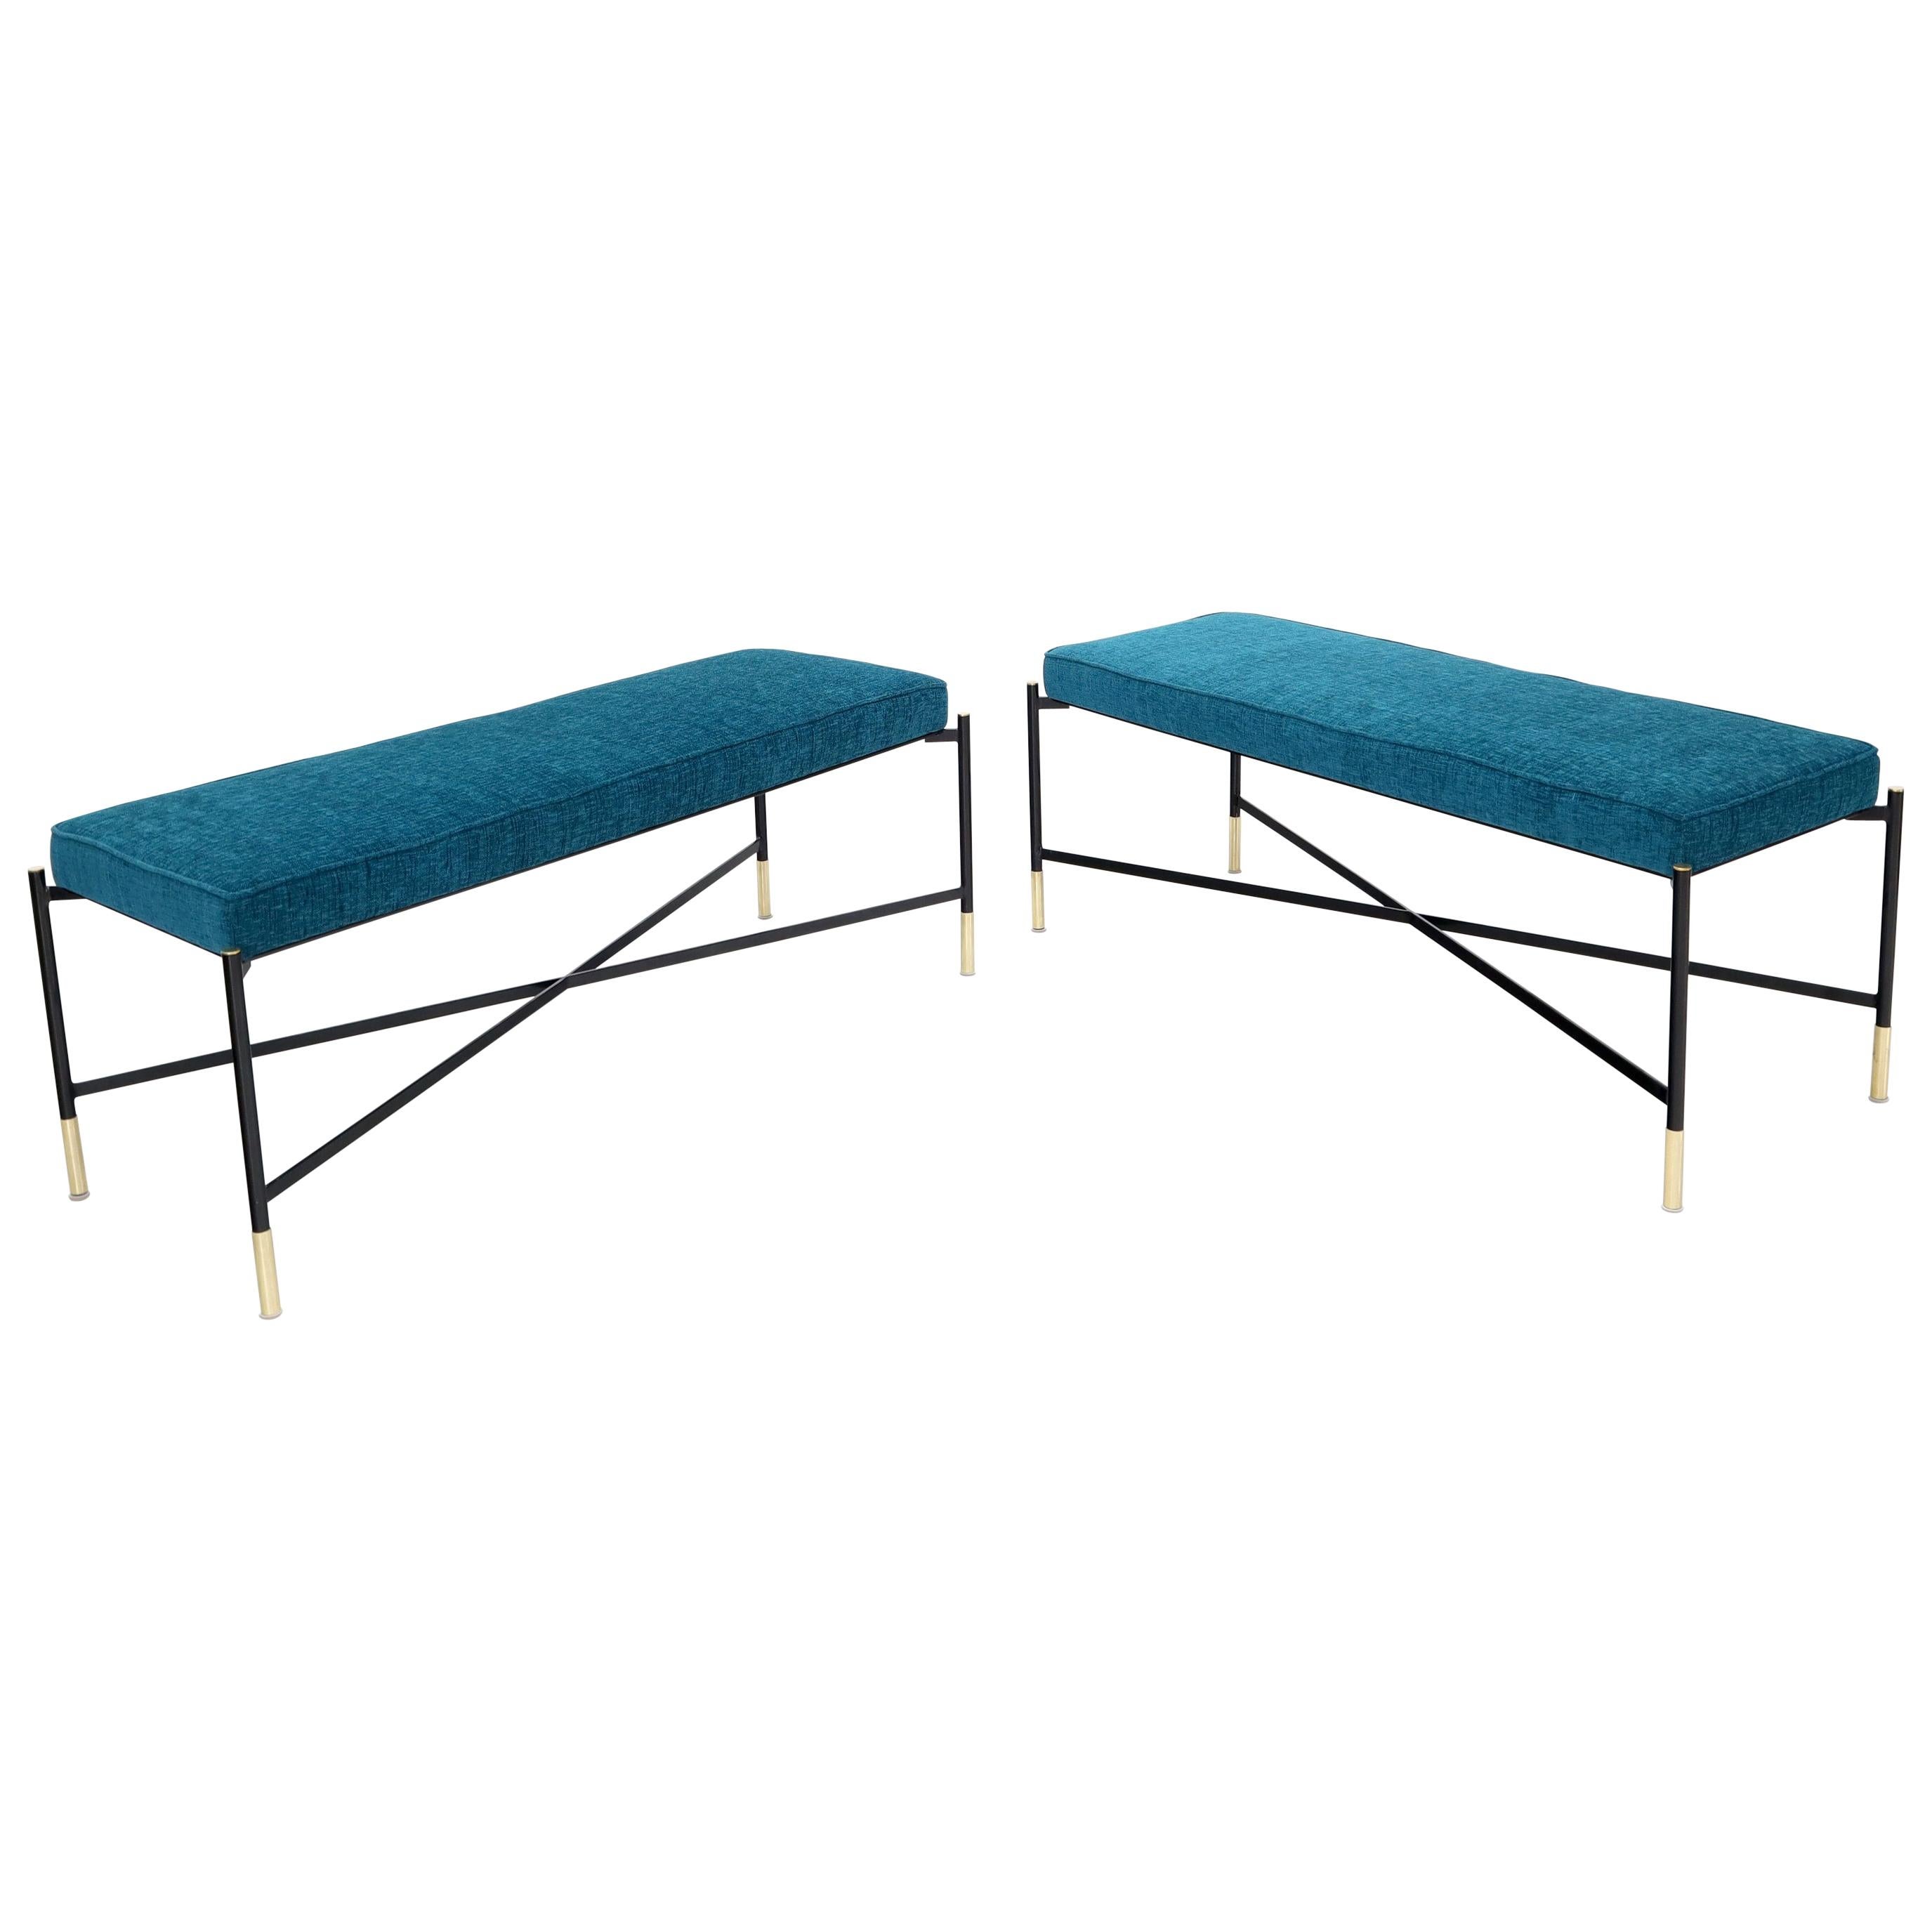 Pair of Italian Mid-Century Modern New Blue Upholstery X-Stretchers Benches For Sale